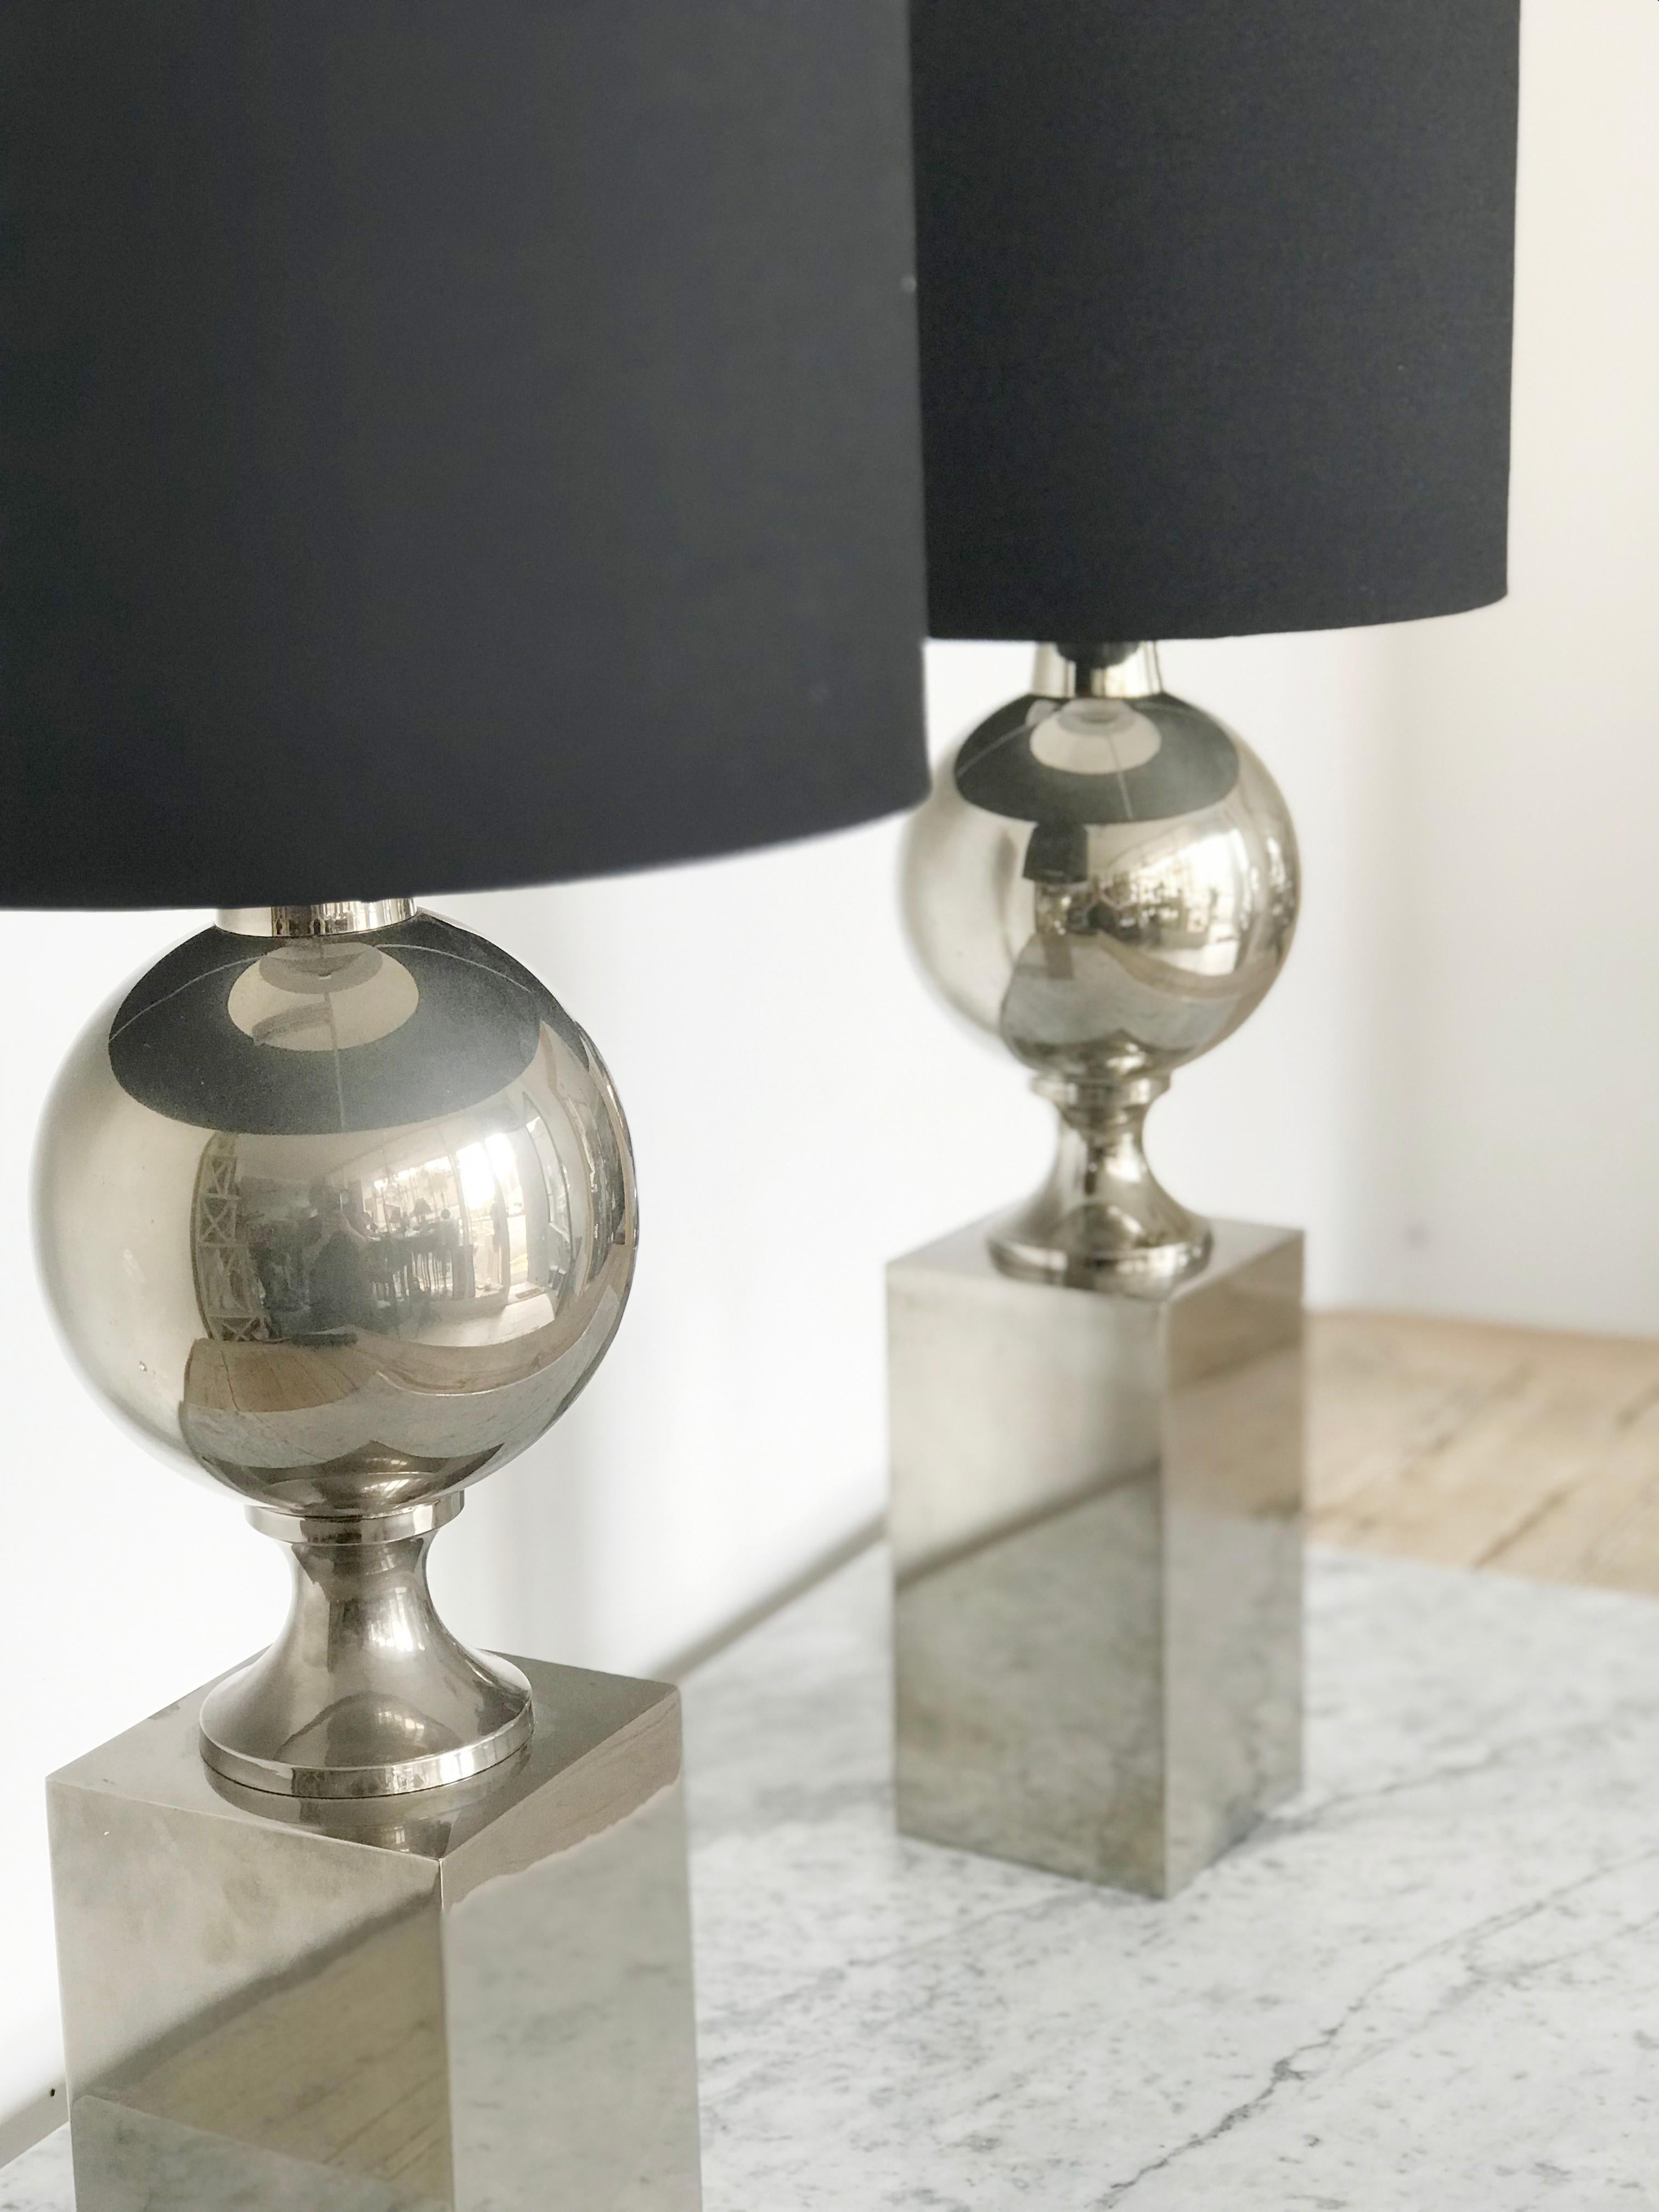 Pair of Philippe Barbier for Maison Barbier chromed steel table lamps of globular form, this Classic and chic style so typical of the Maison Barbier style.
France, 1970s
Contemporary black shades.

There are some small dings in the body, as